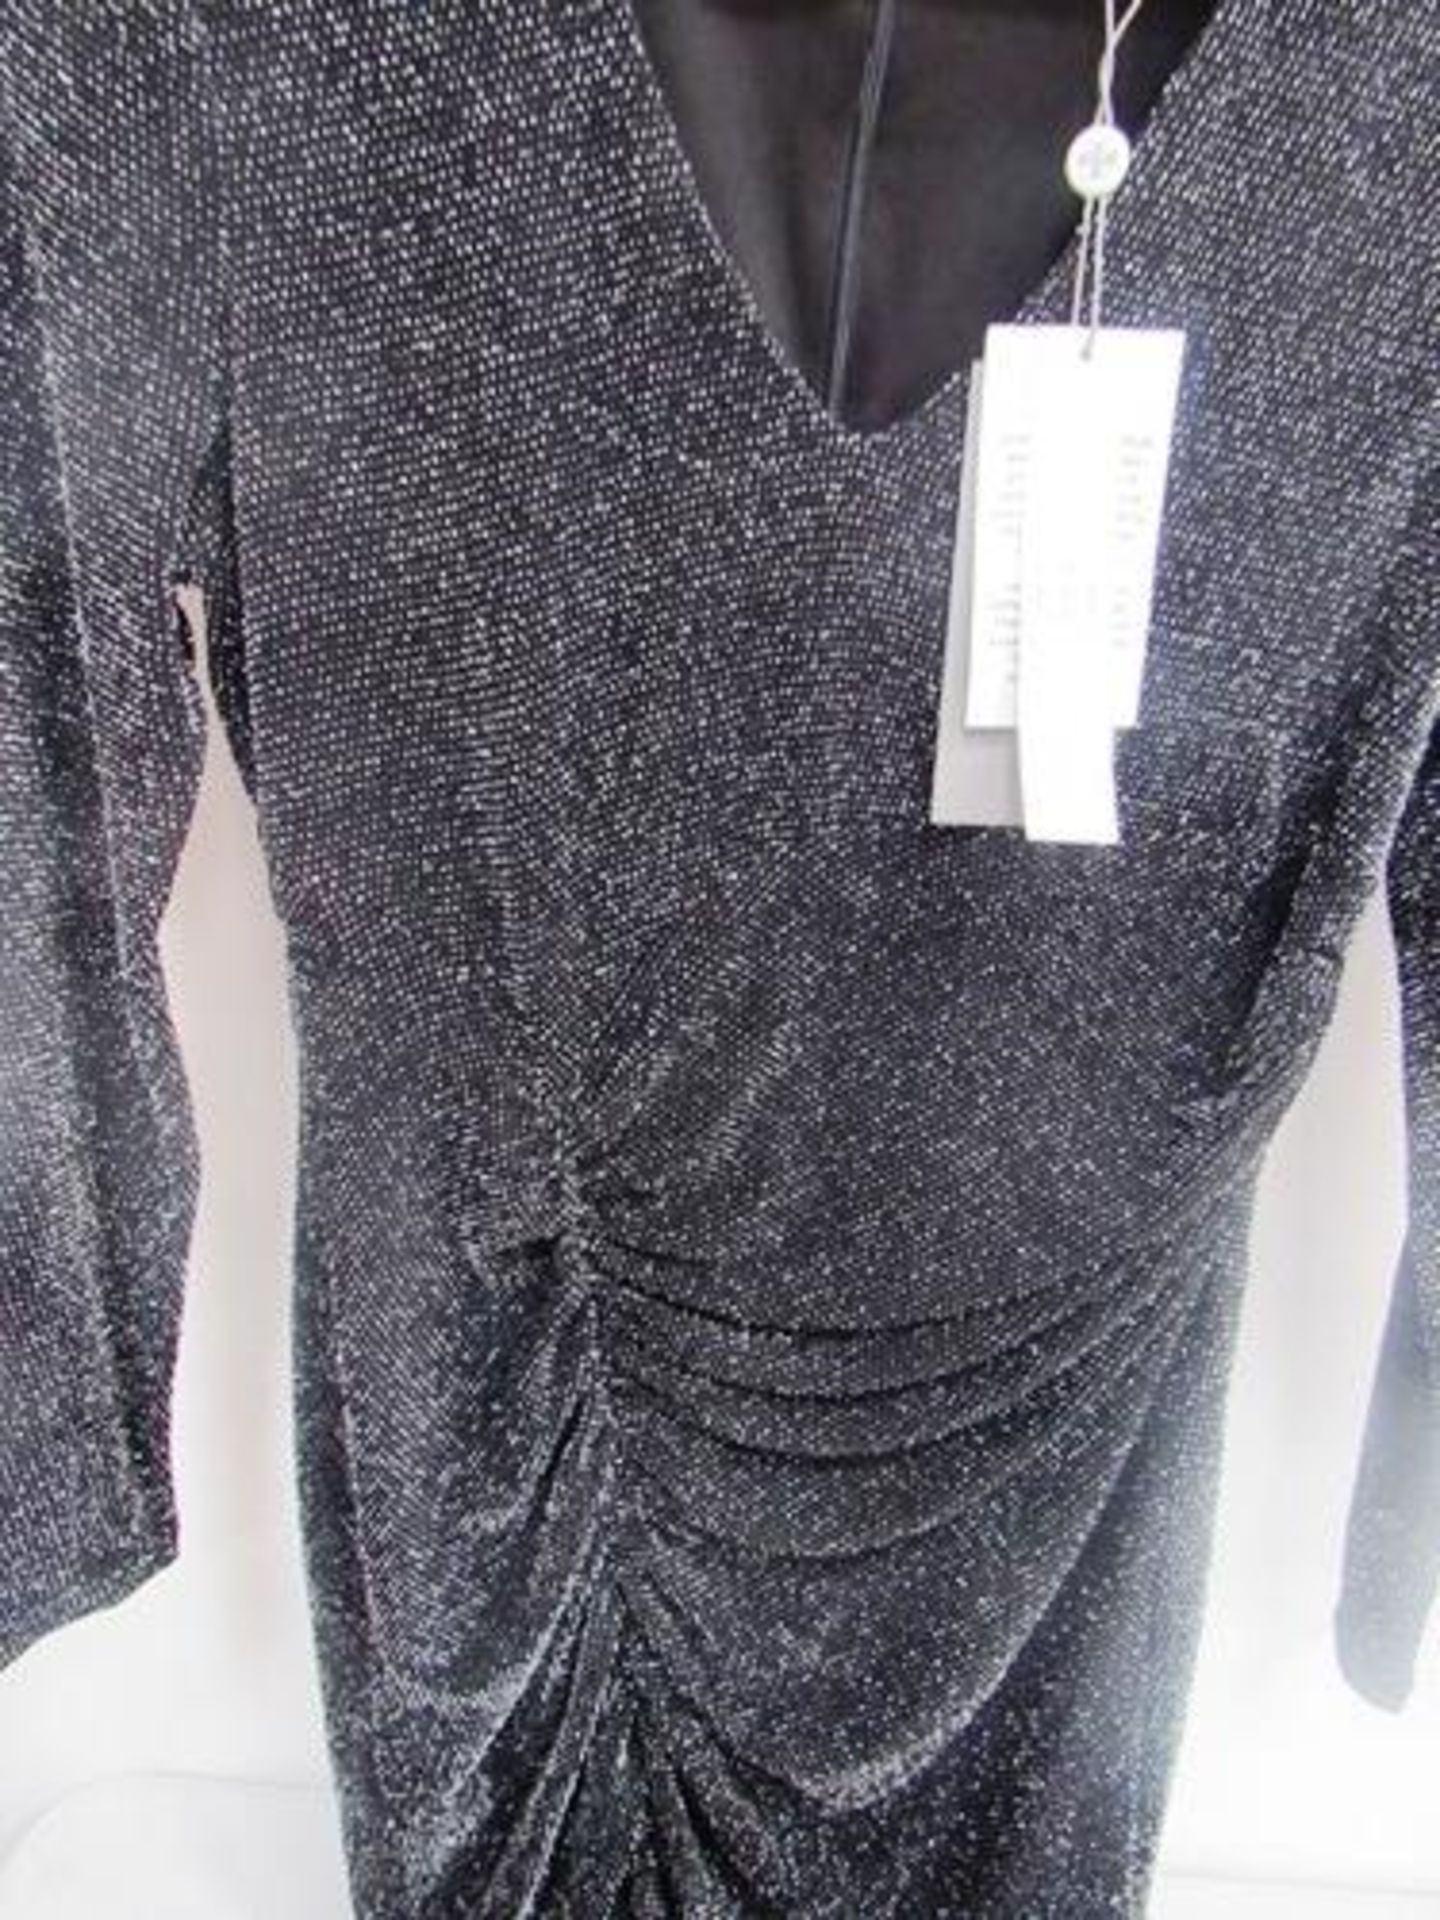 1 x Fenn Wright Manson Fabienne maxi party frock, size 12, RRP £199.00 - New with tags (1A) - Image 2 of 2